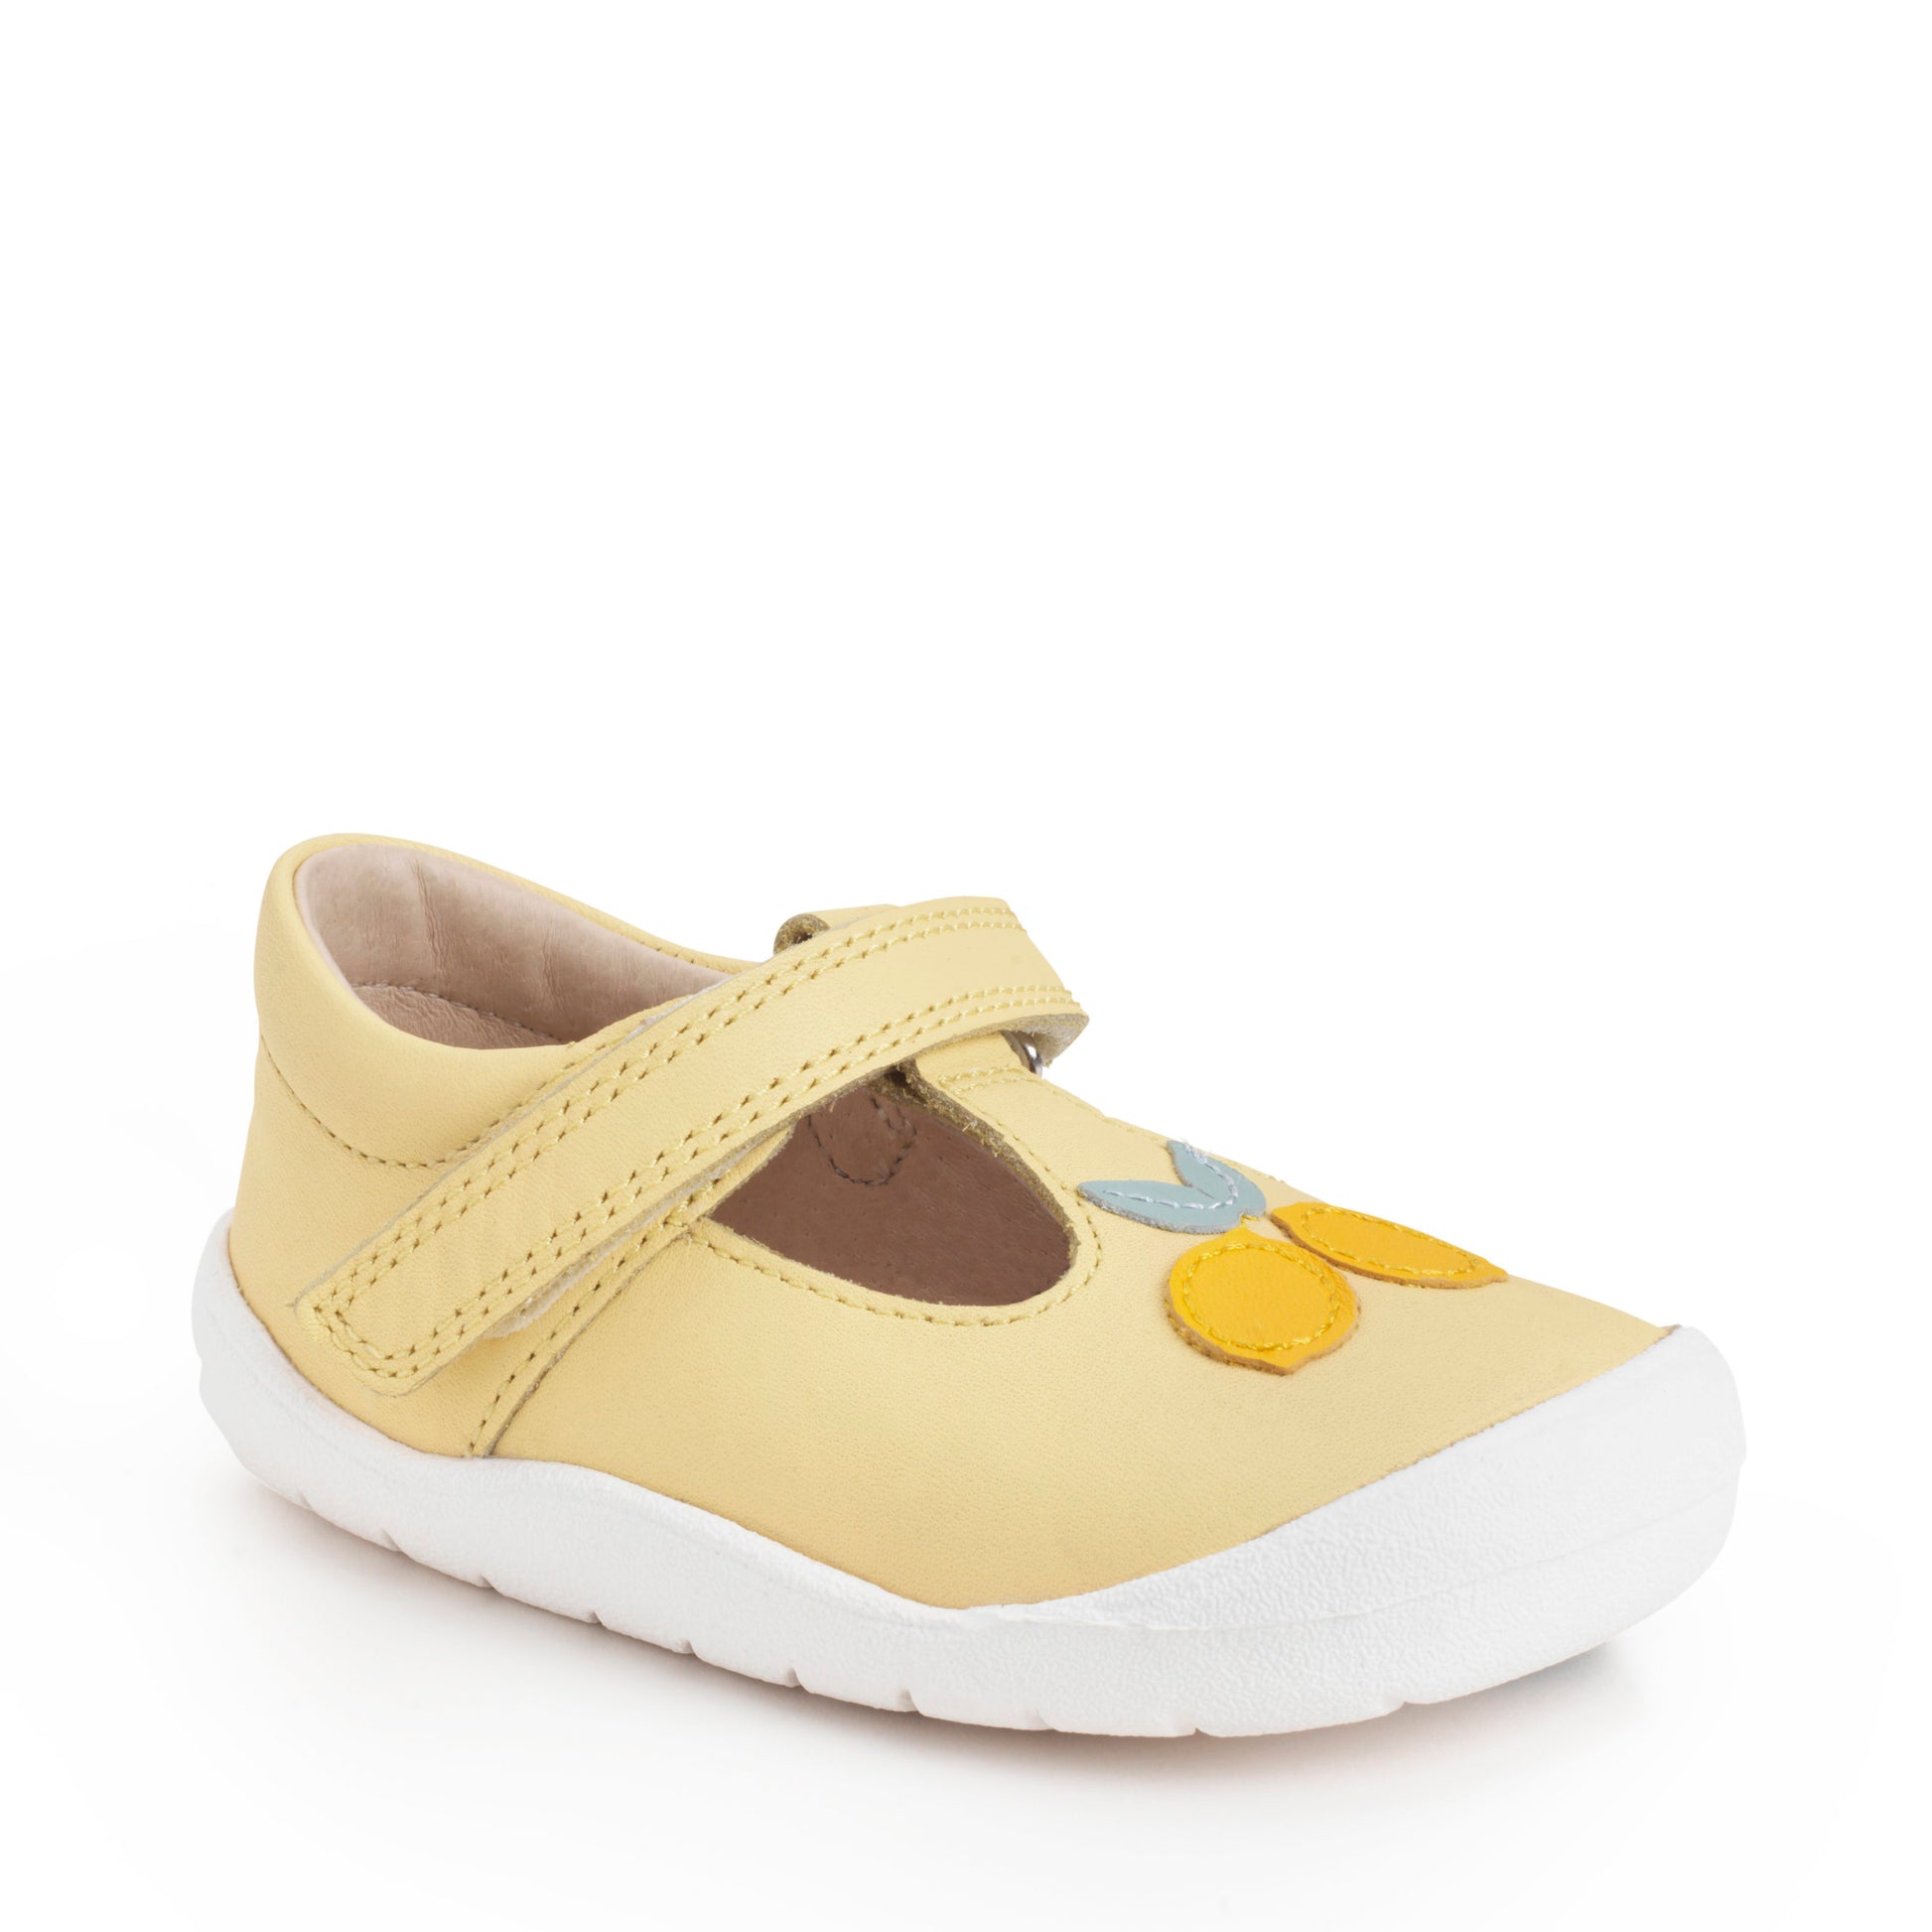 A girls T-Bar shoe by Start Rite + JoJo Maman Bebe ,style Squeeze, in lemon yellow leather with velcro fastening. Angled view.